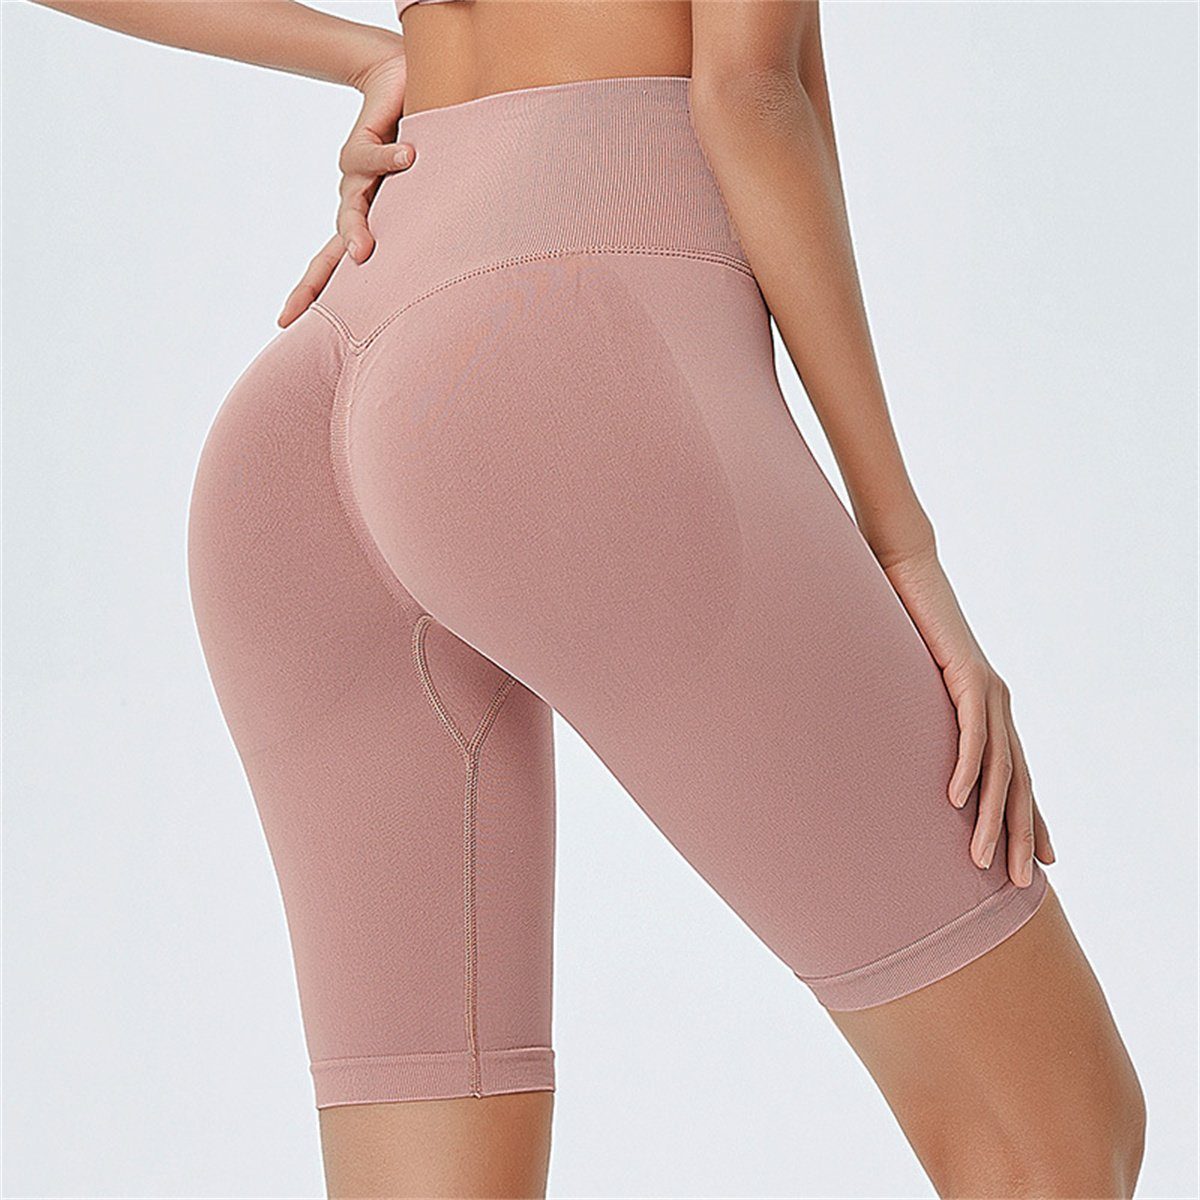 Damen-Fitness-Po-Lifting-Yoga-Shorts Taille hoher selected hellrosa Yogatights carefully mit